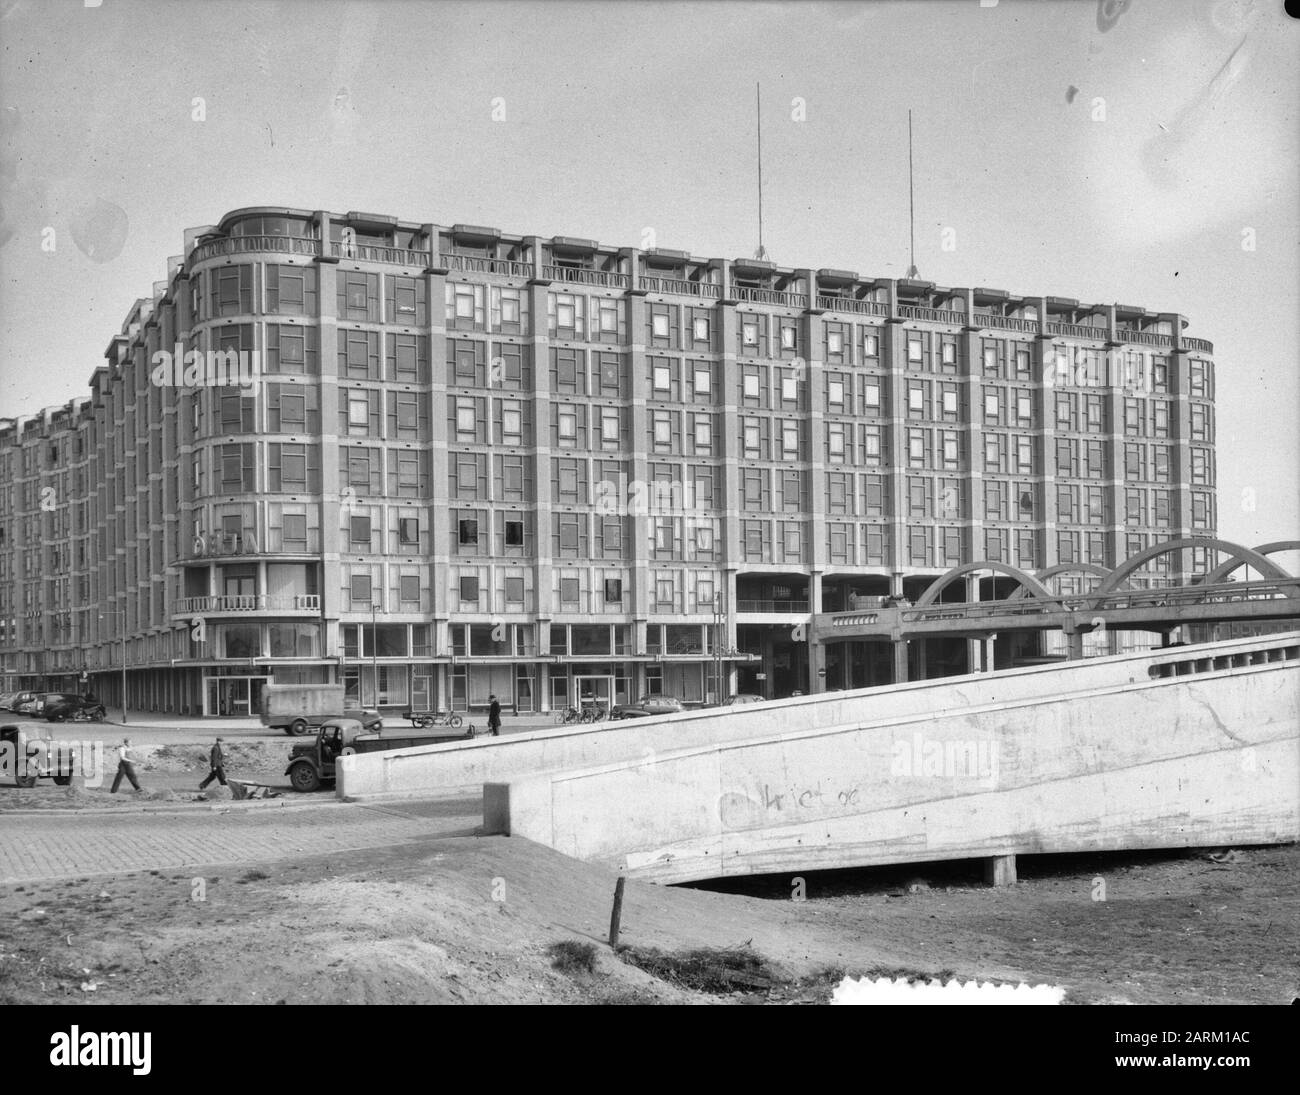 Het Groothandelsgebouw in Rotterdam Annotation: The architects are Huig A. Maaskant and Willem van Tijen Date: March 24, 1953 Location: Rotterdam, Zuid-Holland Keywords: wholesale buildings, office buildings Stock Photo